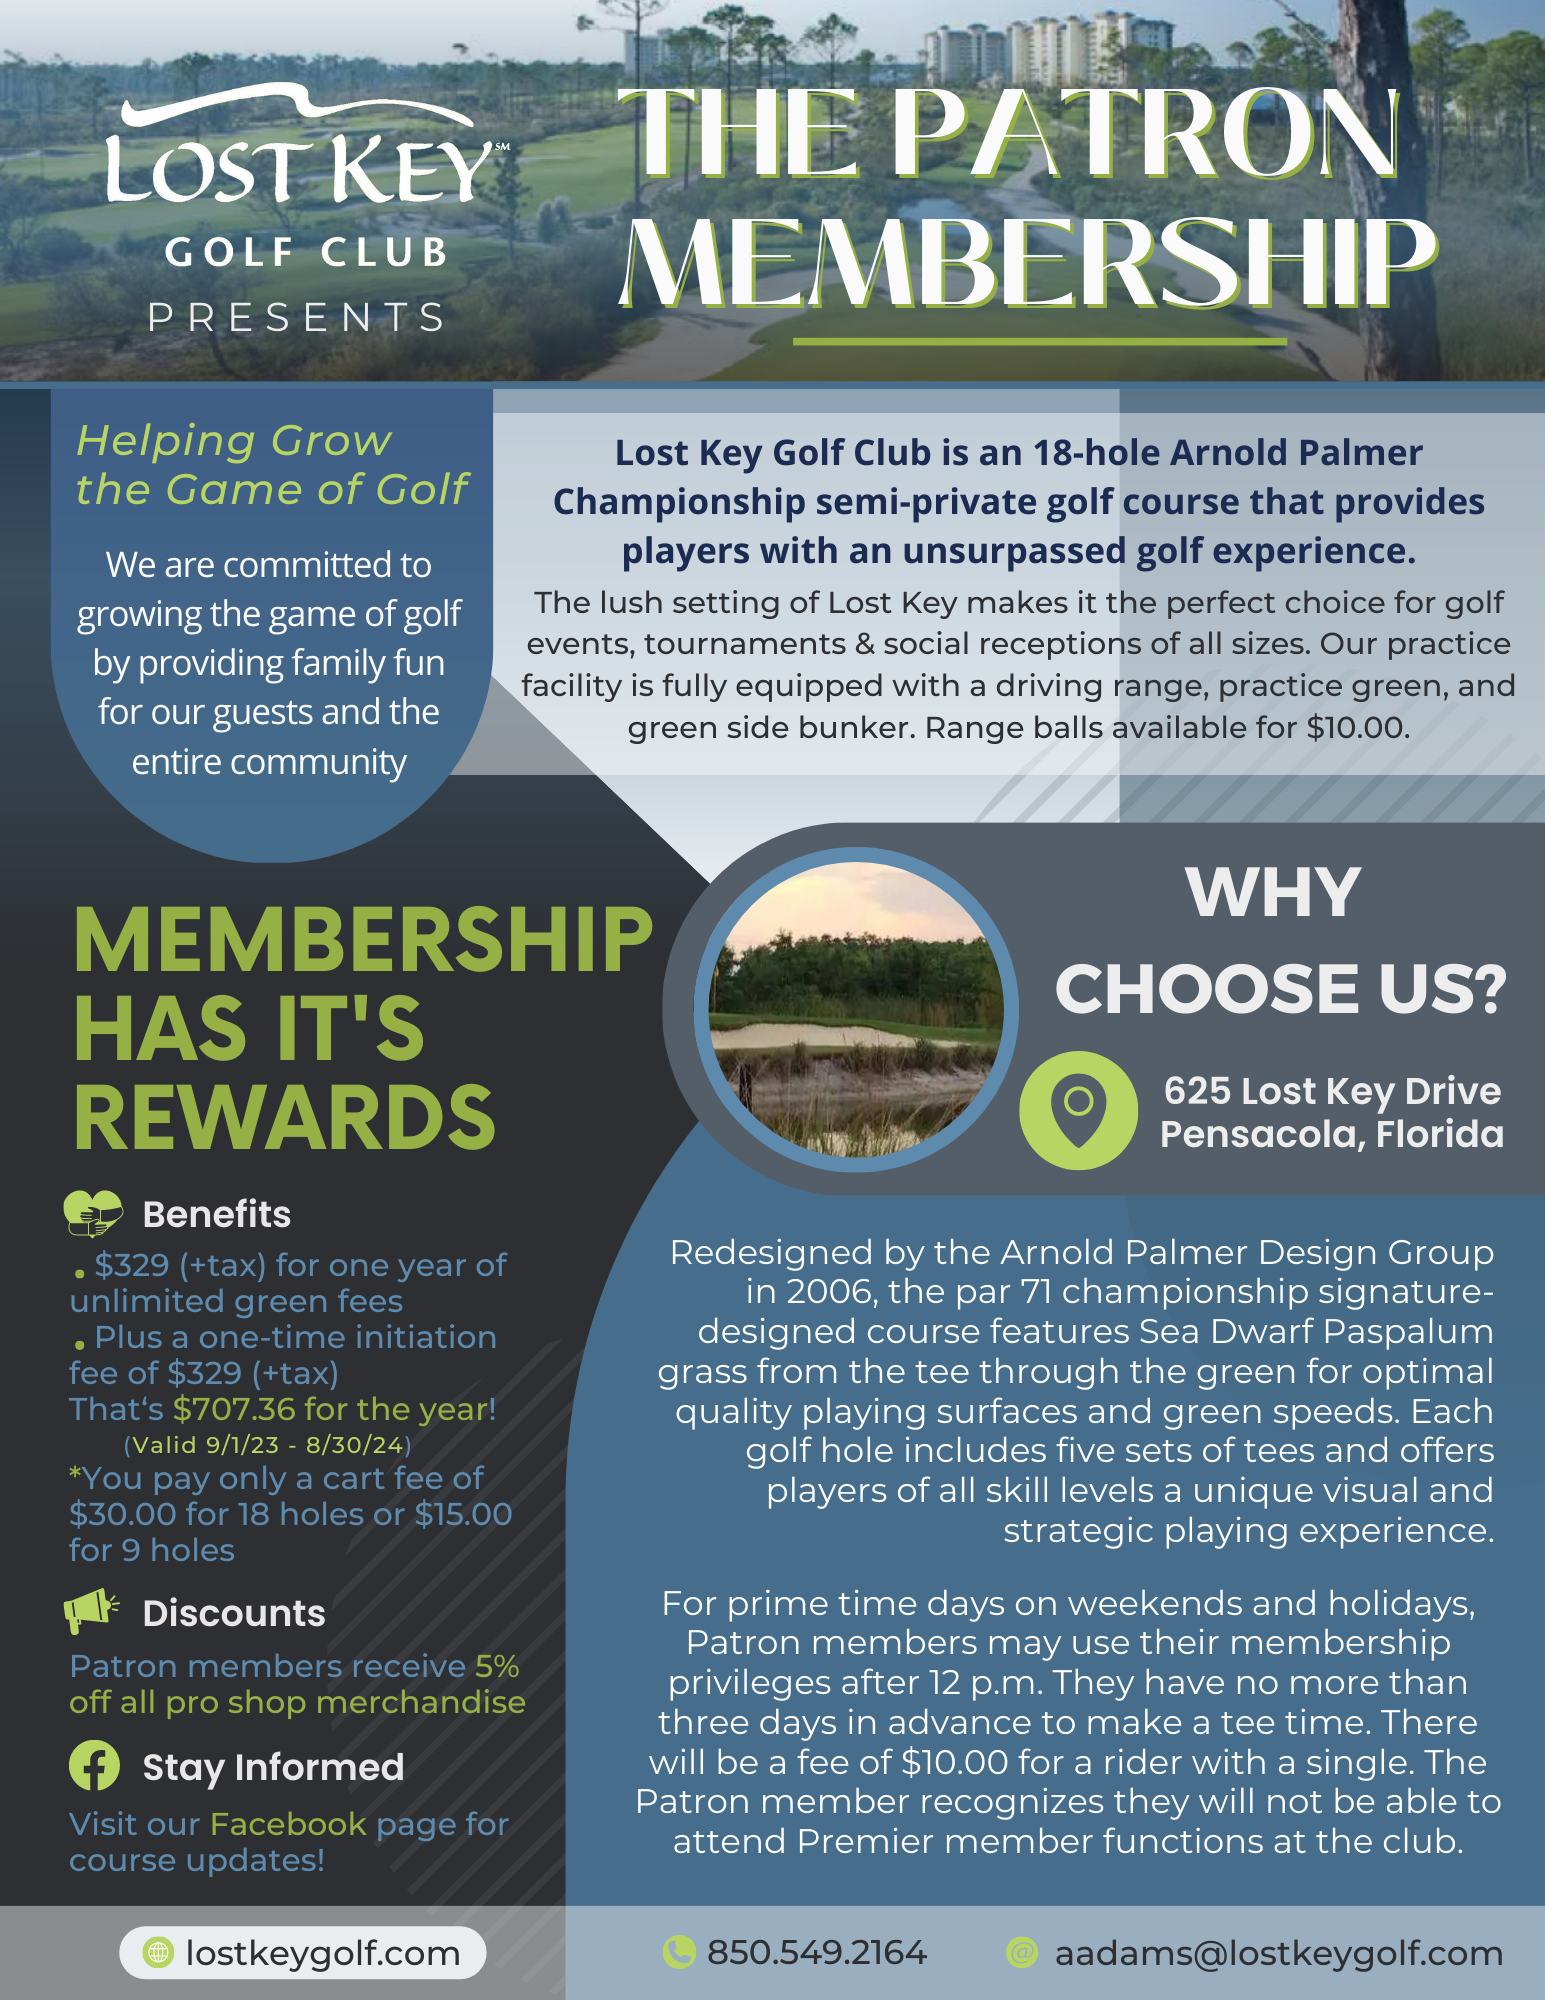 How much a Prime membership costs and key benefits